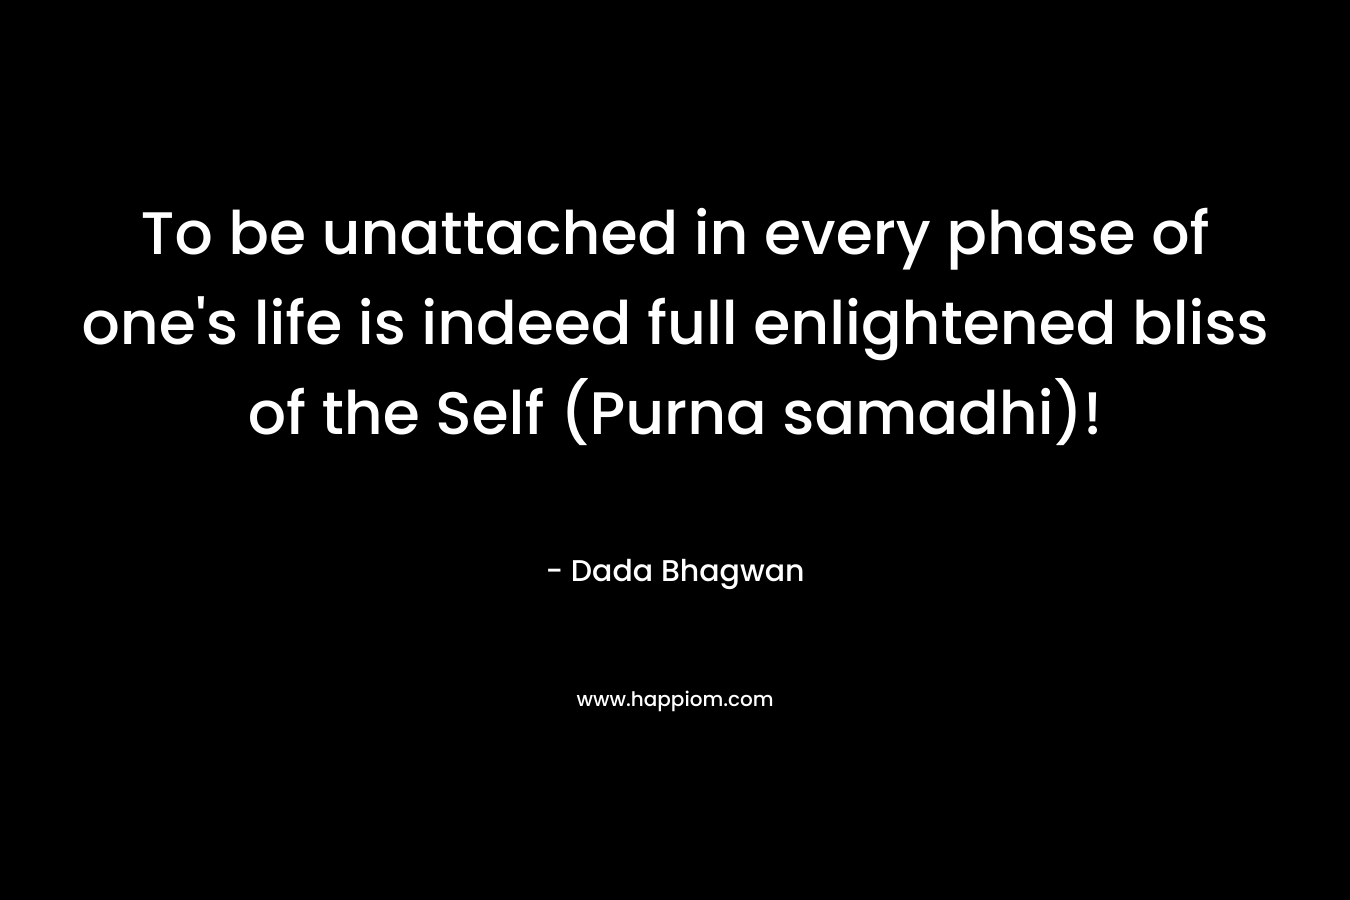 To be unattached in every phase of one's life is indeed full enlightened bliss of the Self (Purna samadhi)!